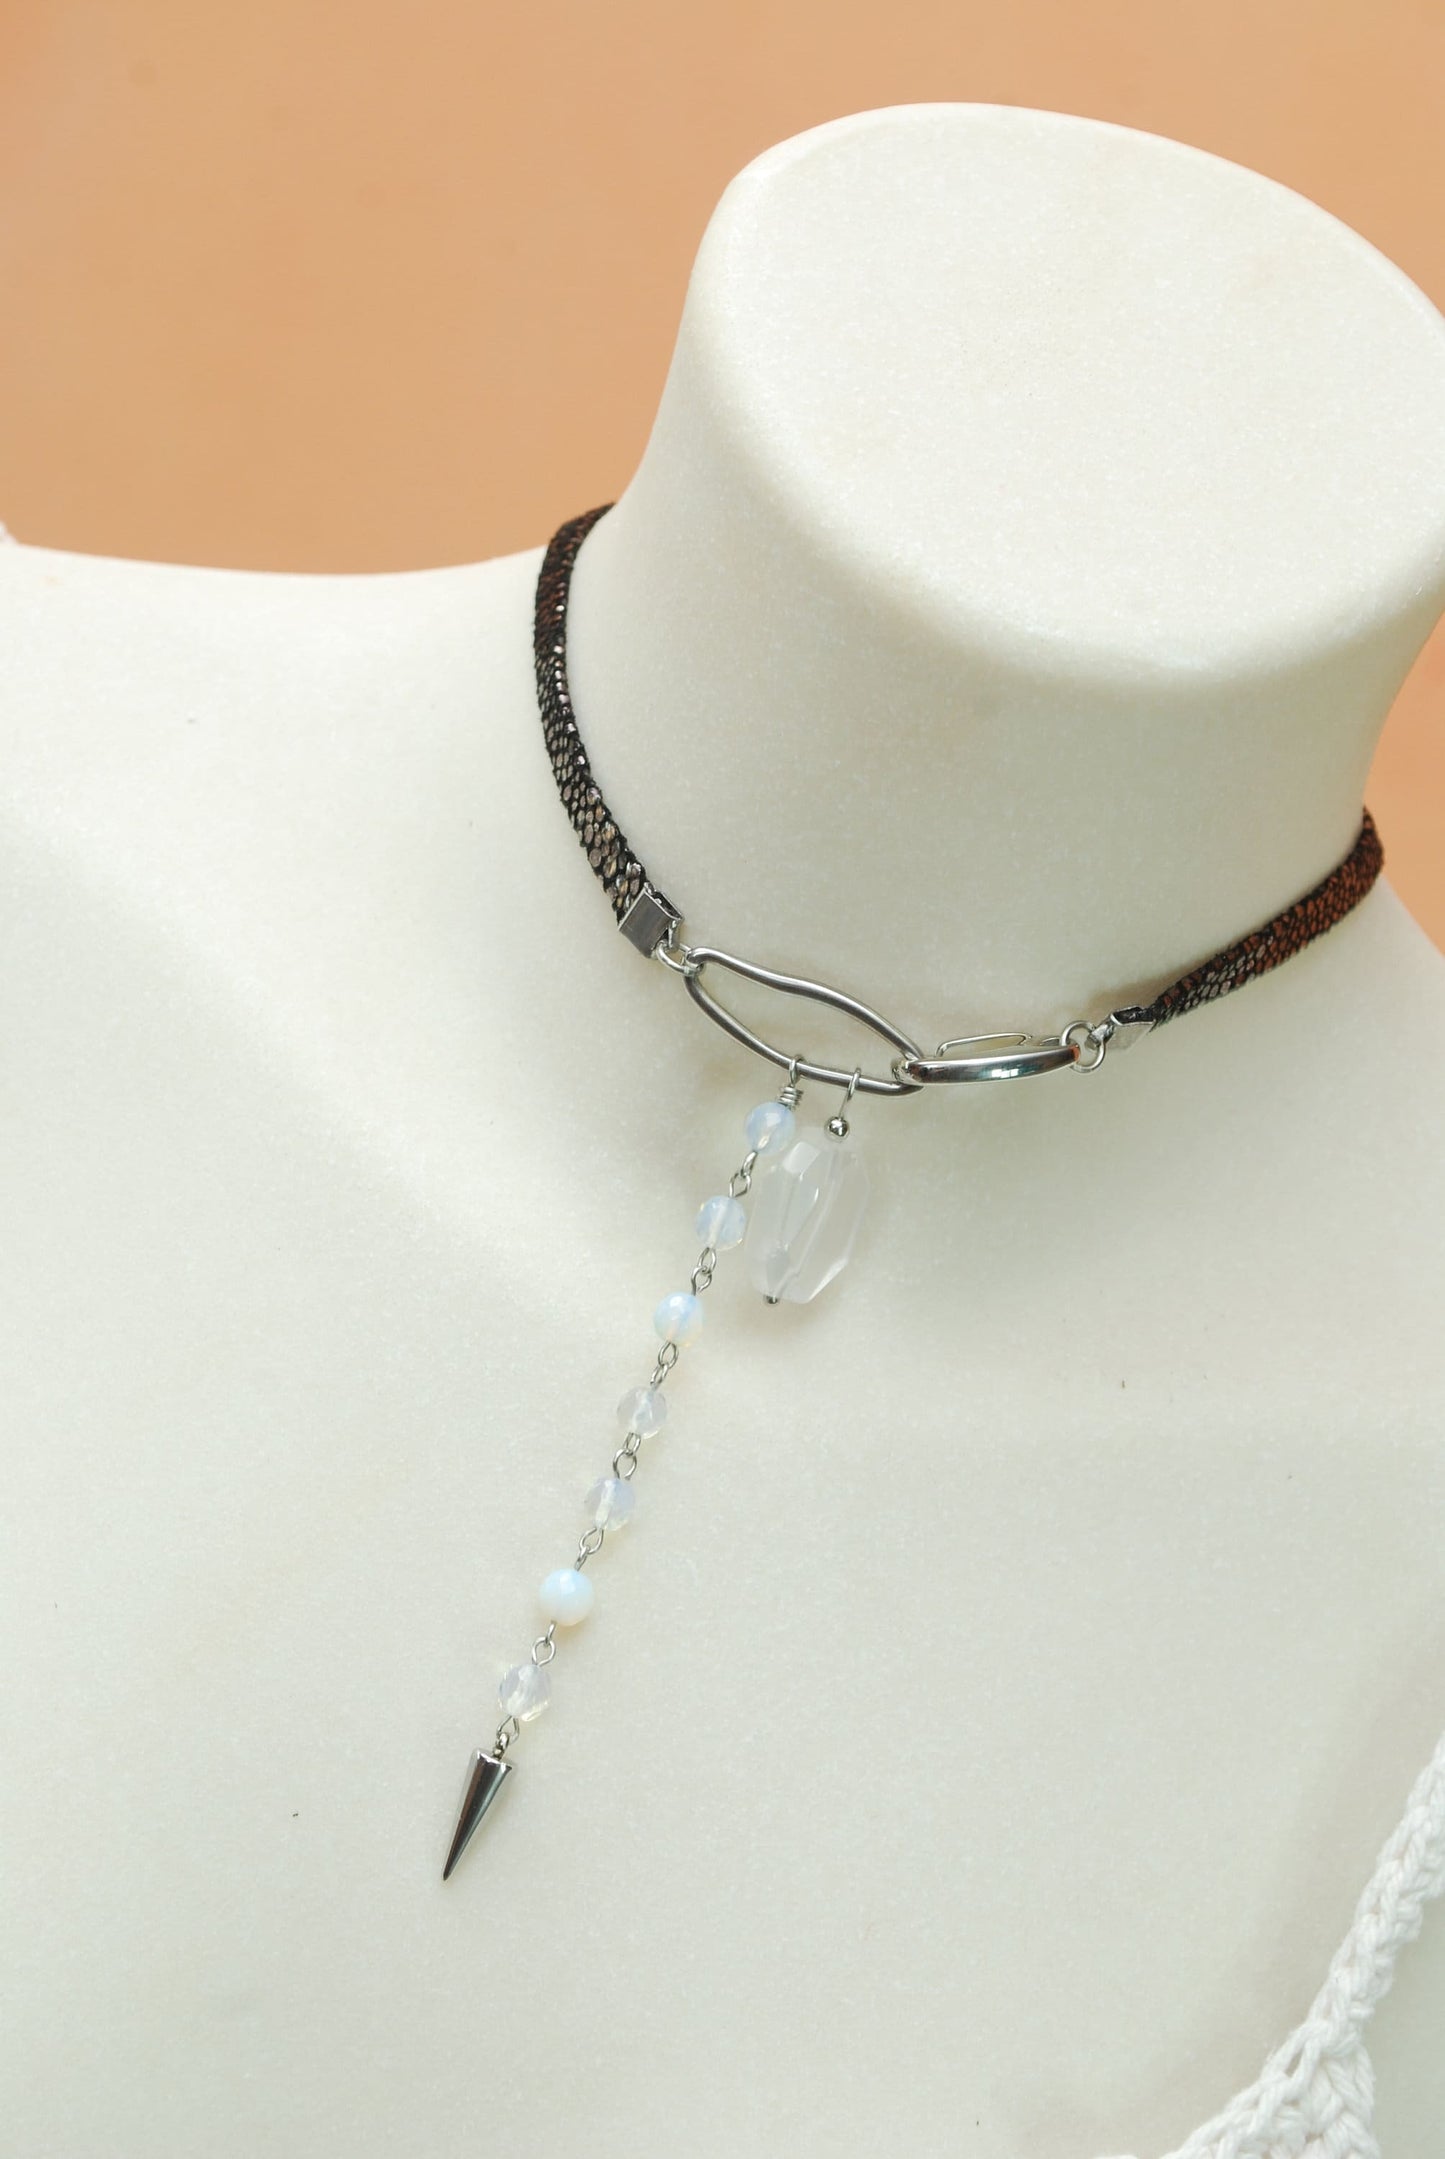 Black Leather Choker with Opaline Bead Cascade and Crystal Stone Accent: Unique Handmade Statement Piece for Bold Fashionistas. Estibela.